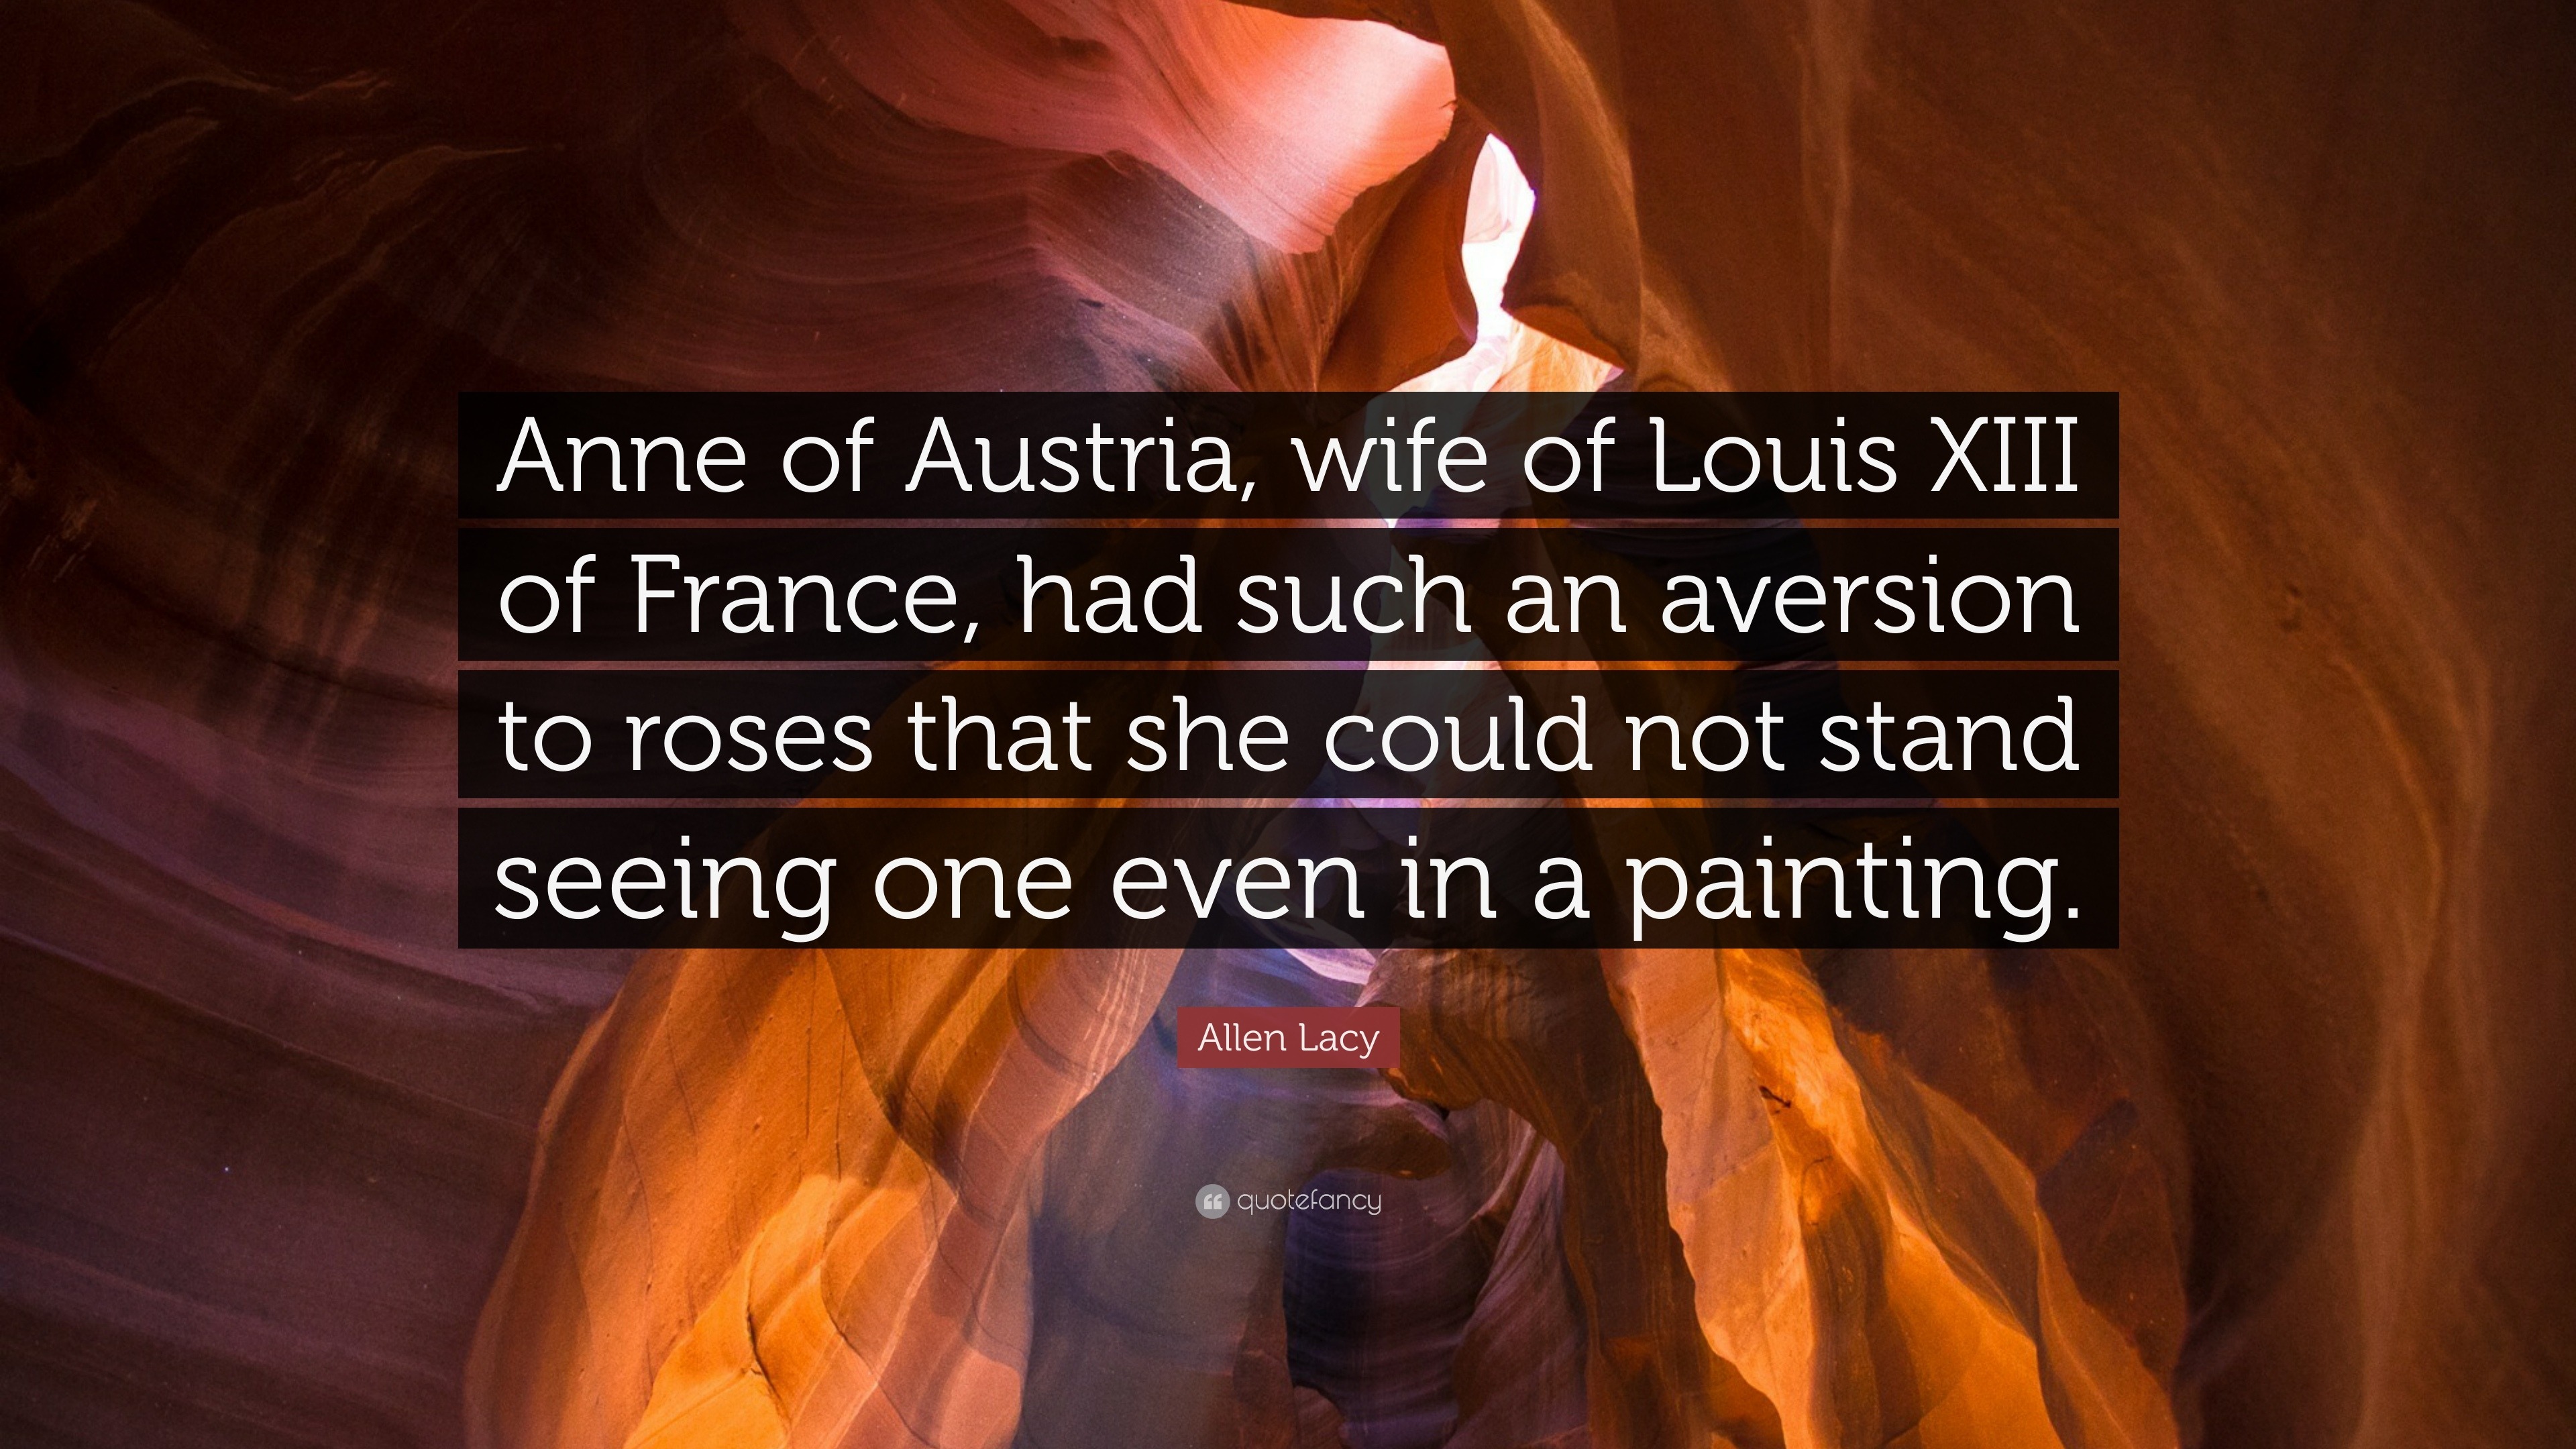 Allen Lacy Quote: “Anne of Austria, wife of Louis XIII of France